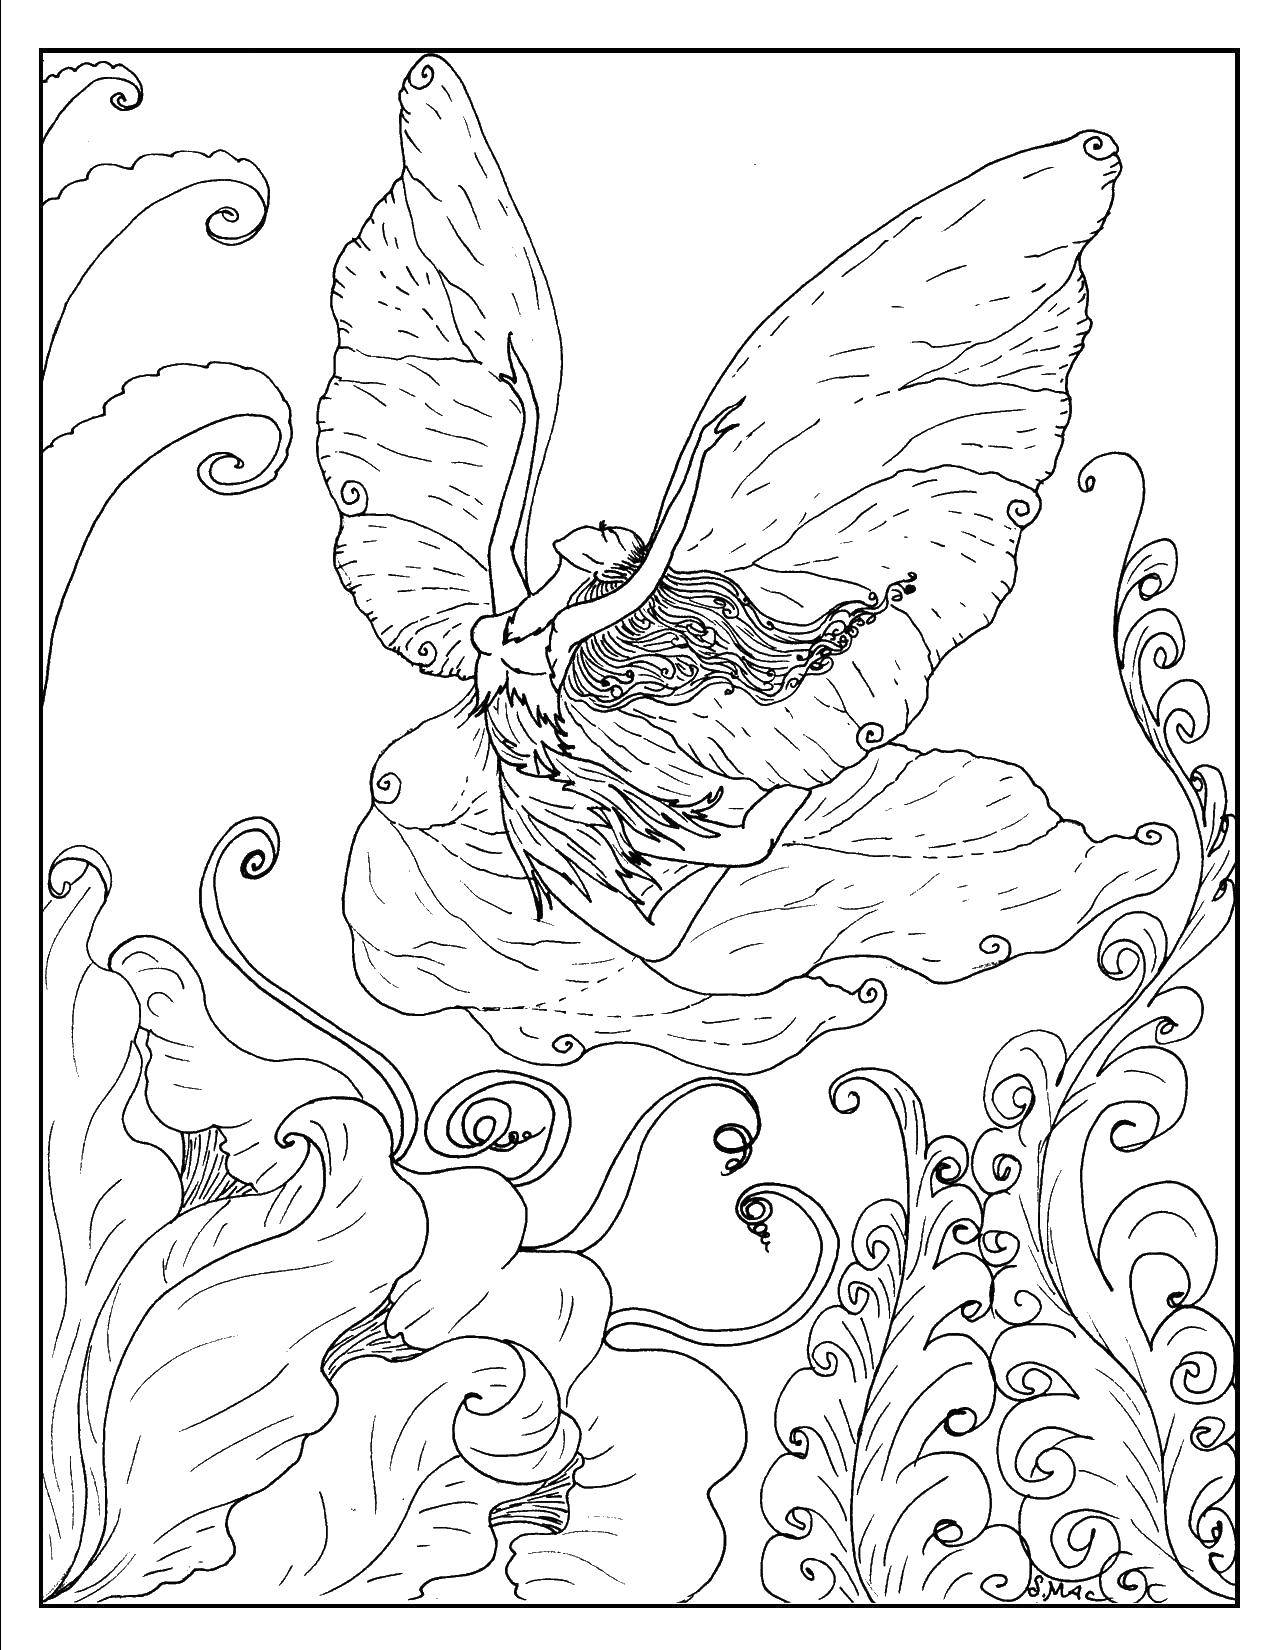 Coloring Girl butterfly. Category Fantasy. Tags:  fantasy, fairy, butterfly, wings.